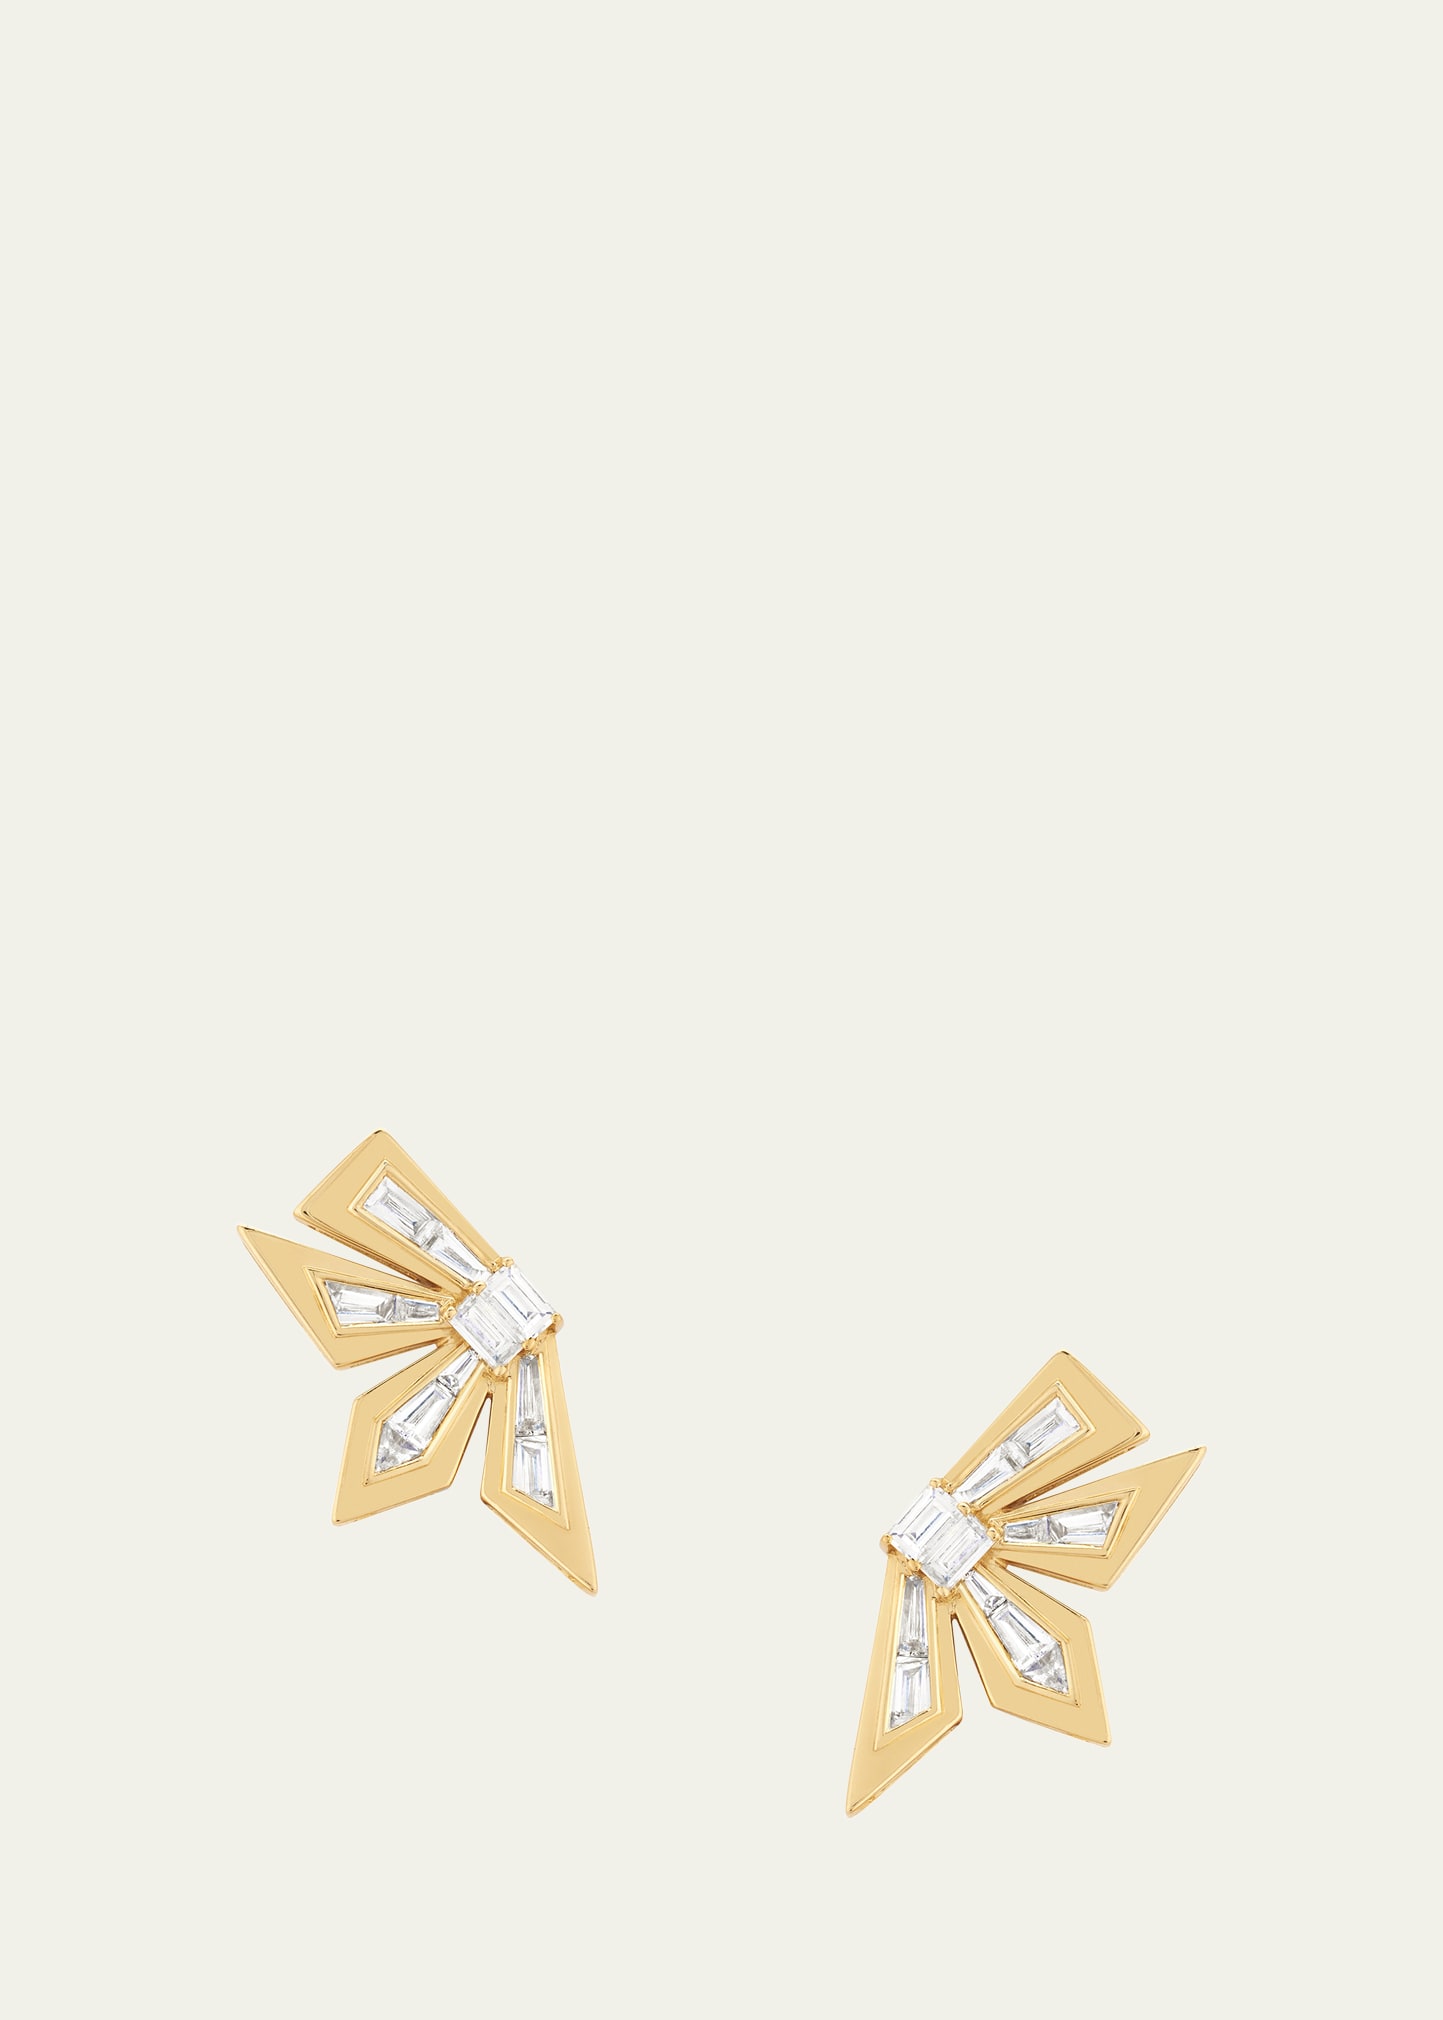 Yellow Gold Dynamite Earrings with Diamonds